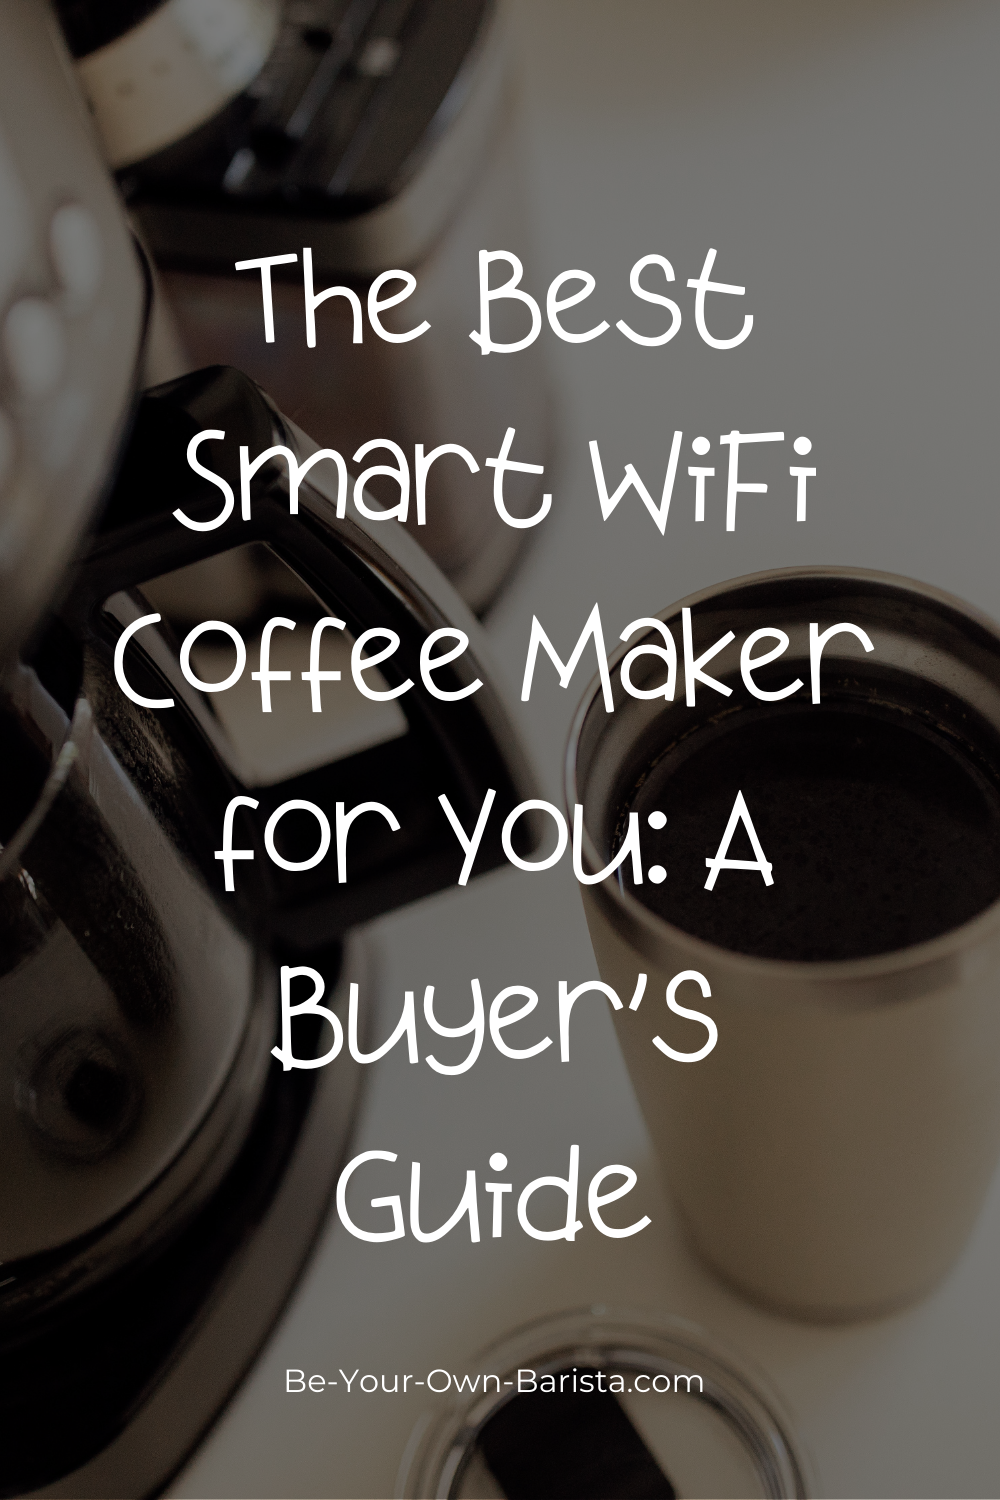 WiFi Coffee Maker Buyer's Guide (How to Find the Best Smart Coffee